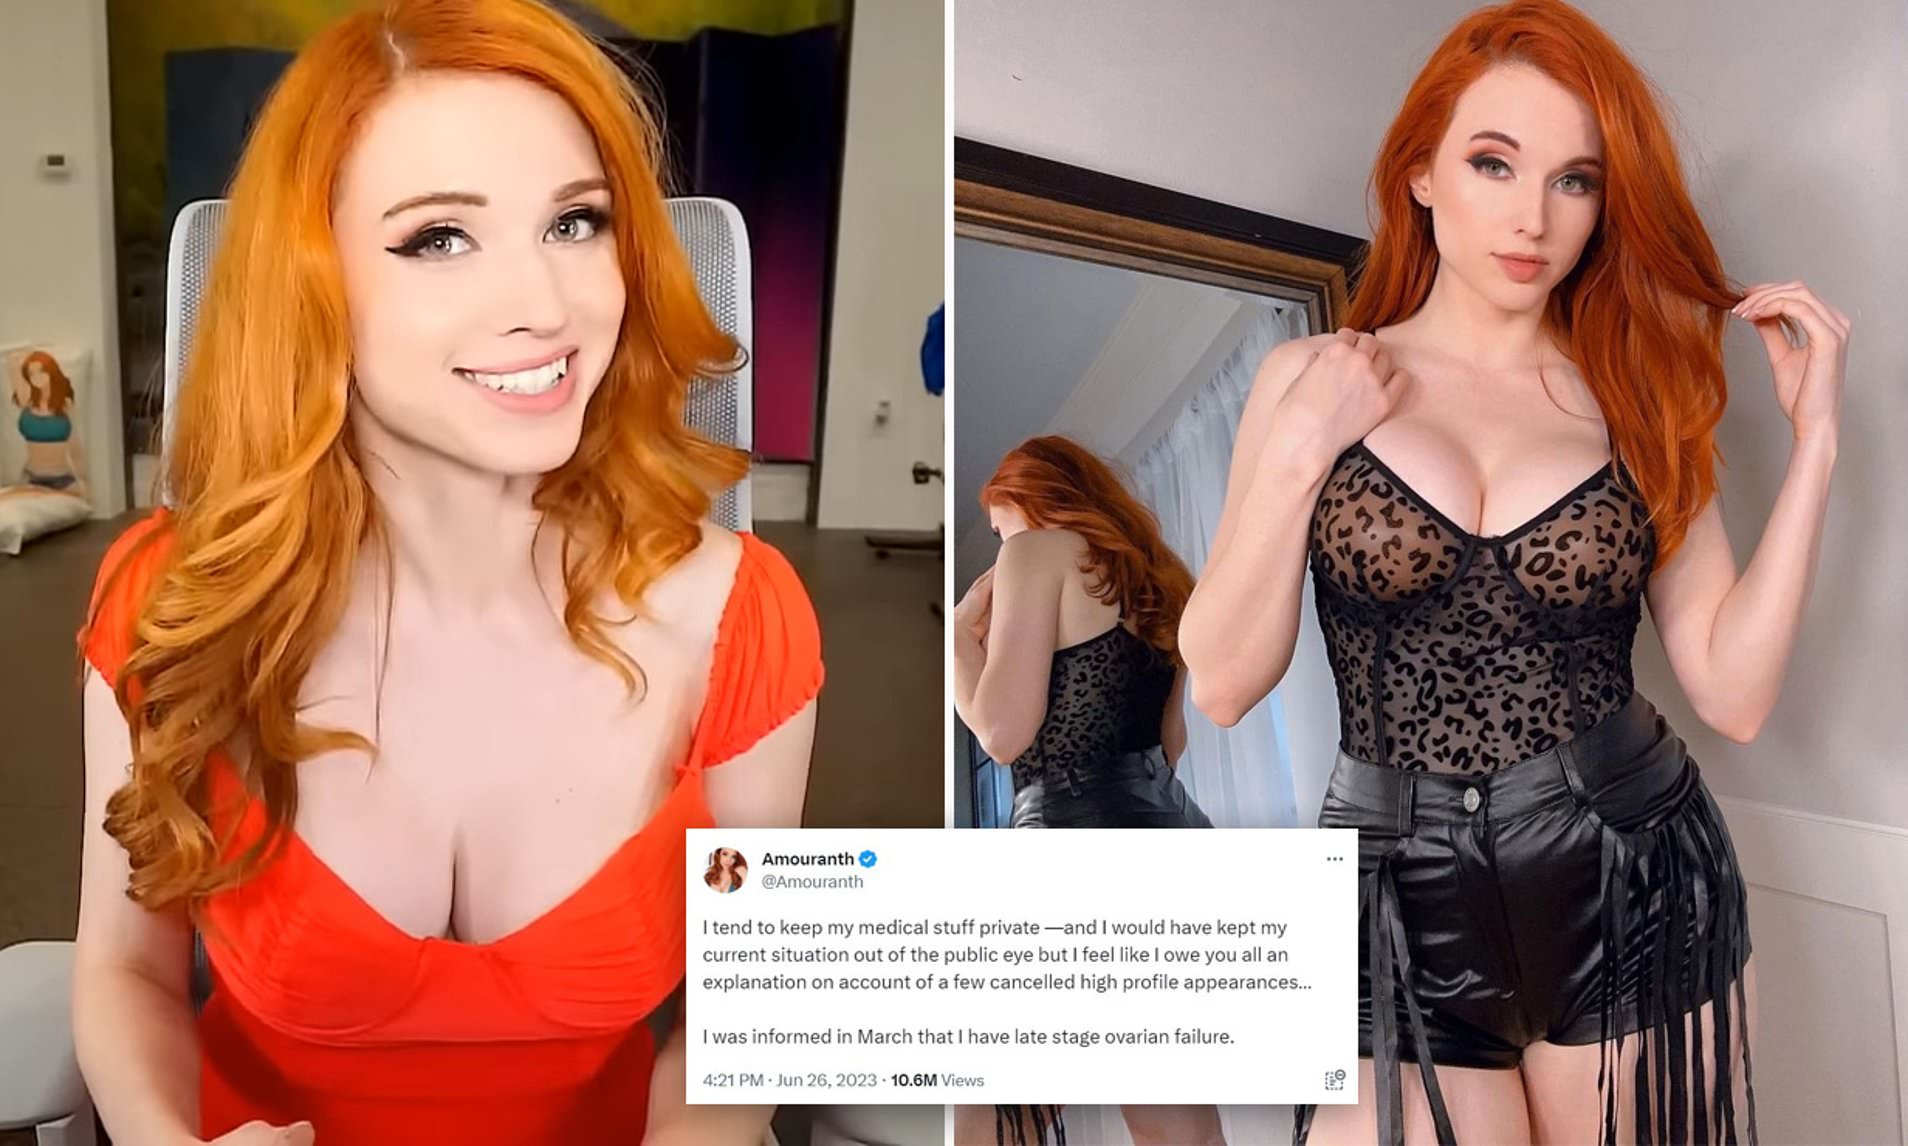 How Much Does Amouranth Make From Onlyfans